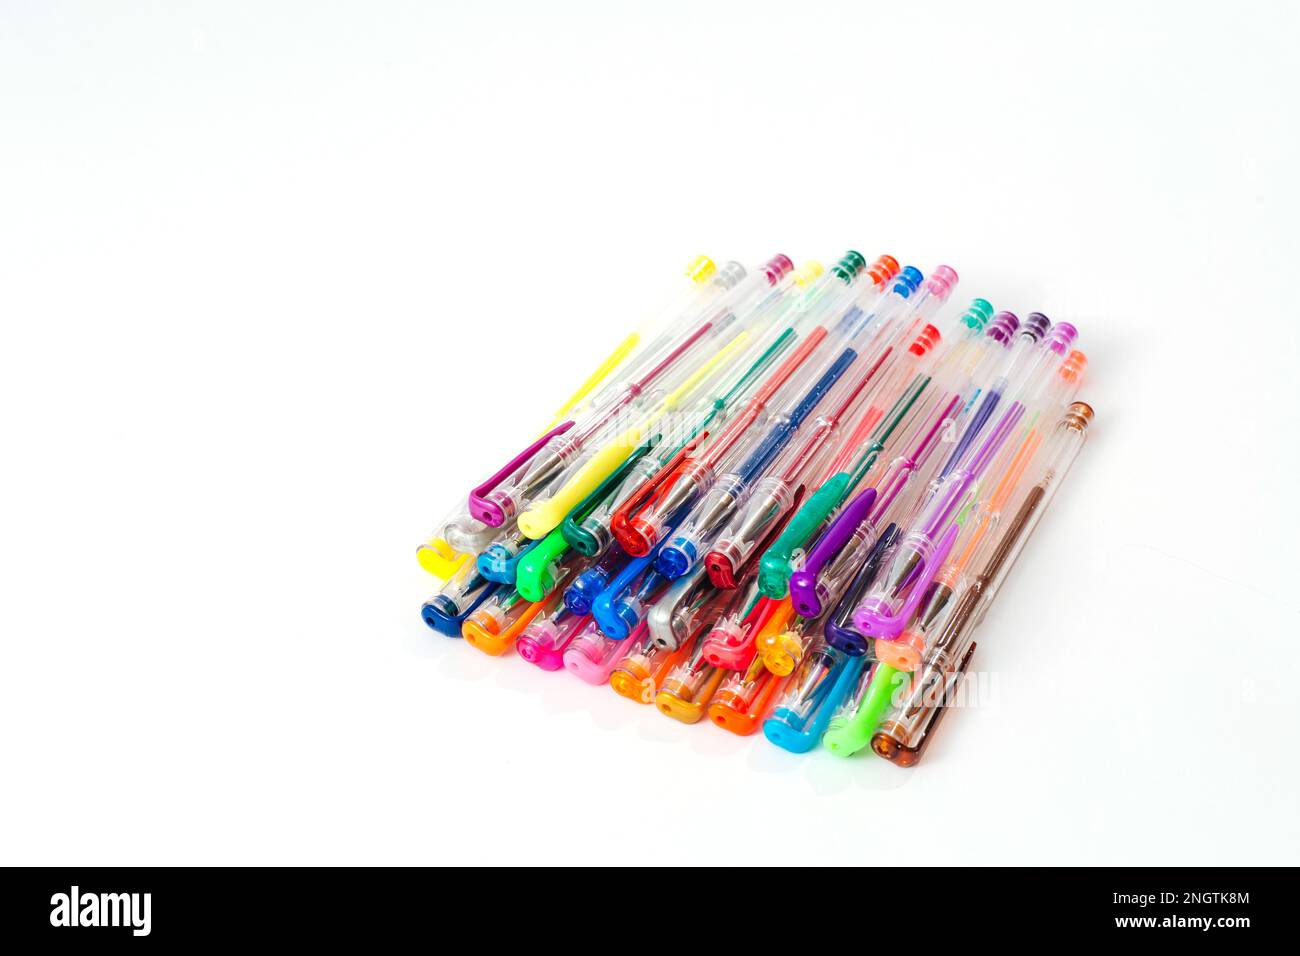 Multi-colored gel pens on a white isolated background. Isolated Stock Photo